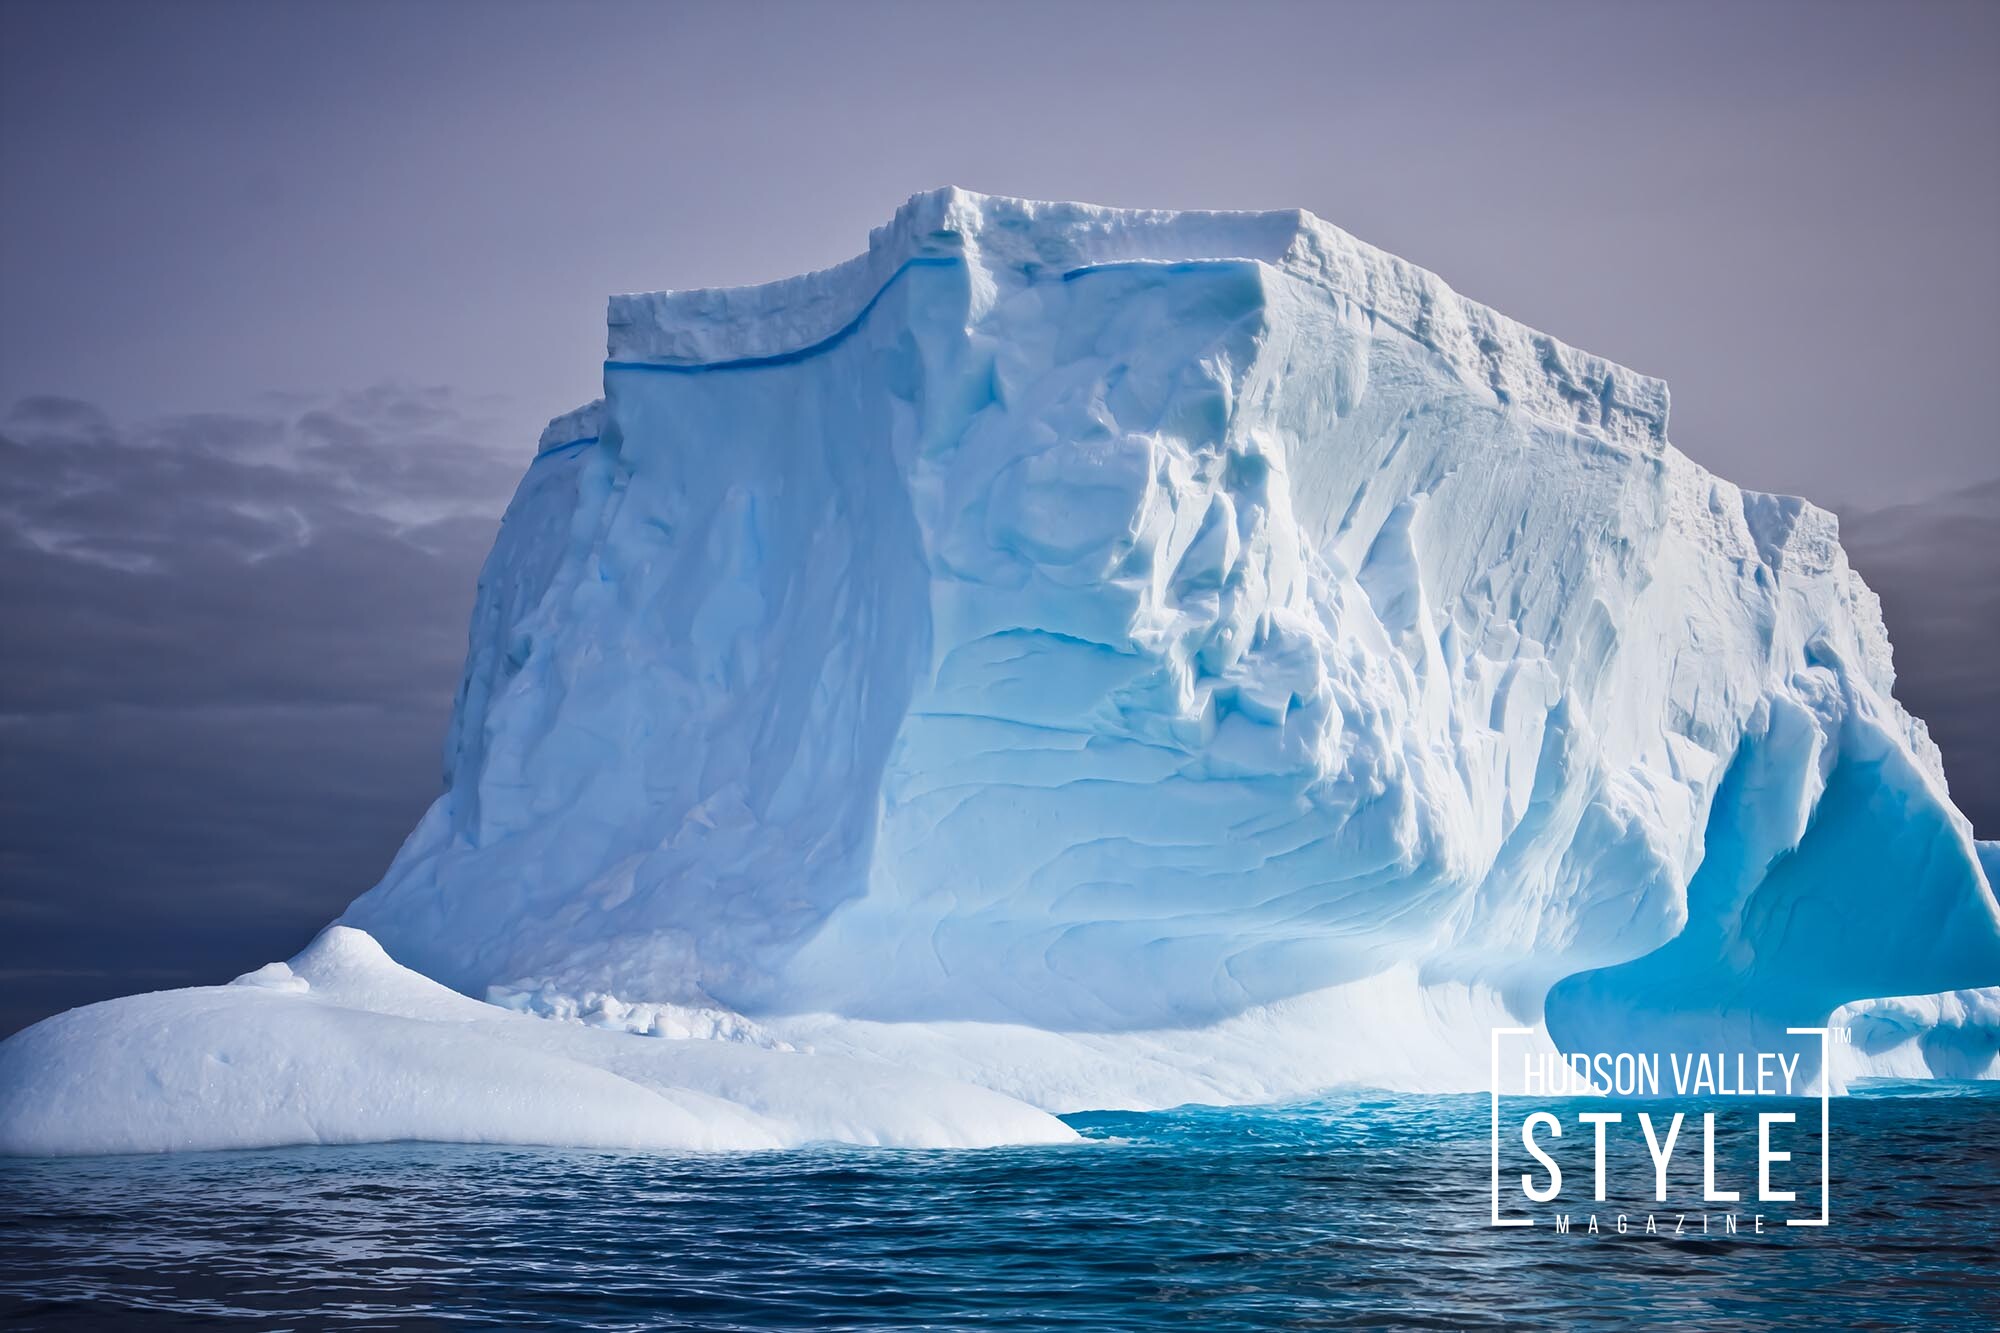 Thwaites glacier in West Antarctica contains enough ice to raise global sea levels by 65cm if it collapsed completely.